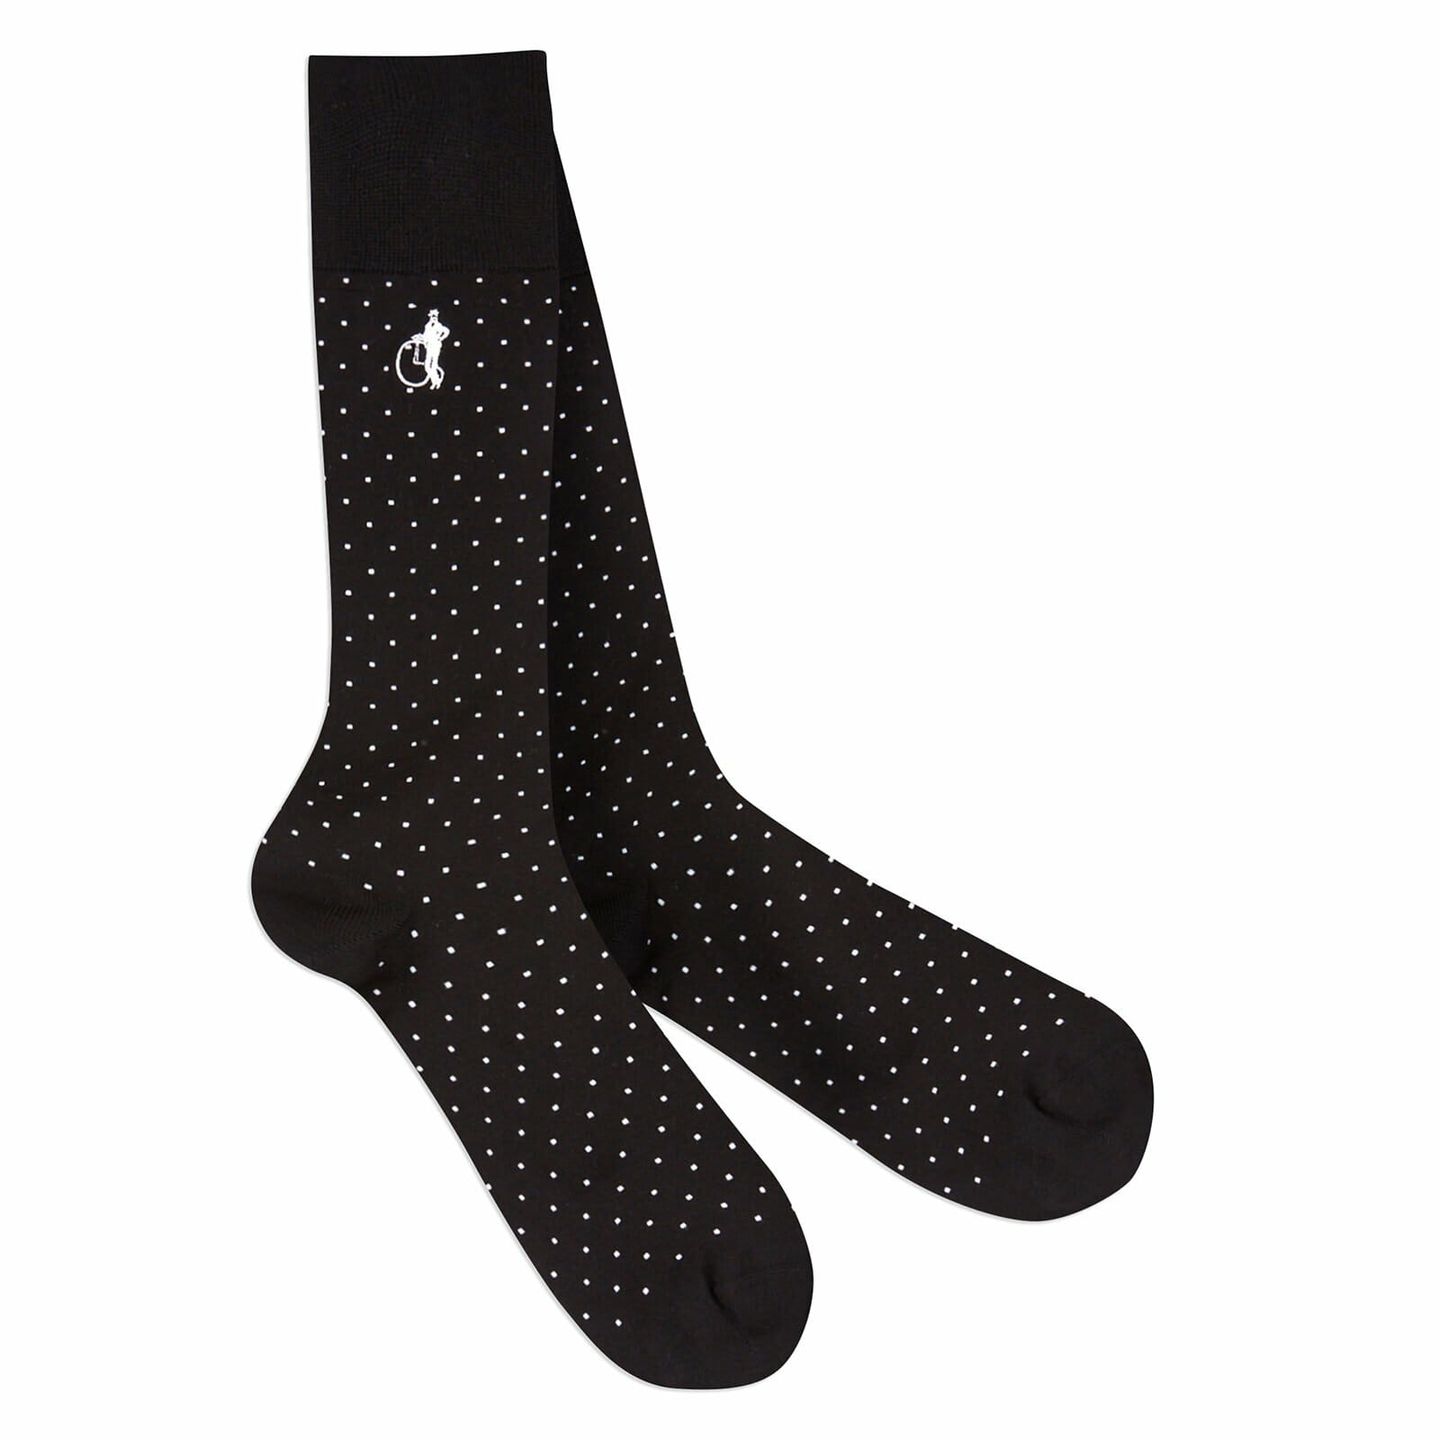 Spot of Style Black Socks with White Dots and London Sock Company logo embroidered